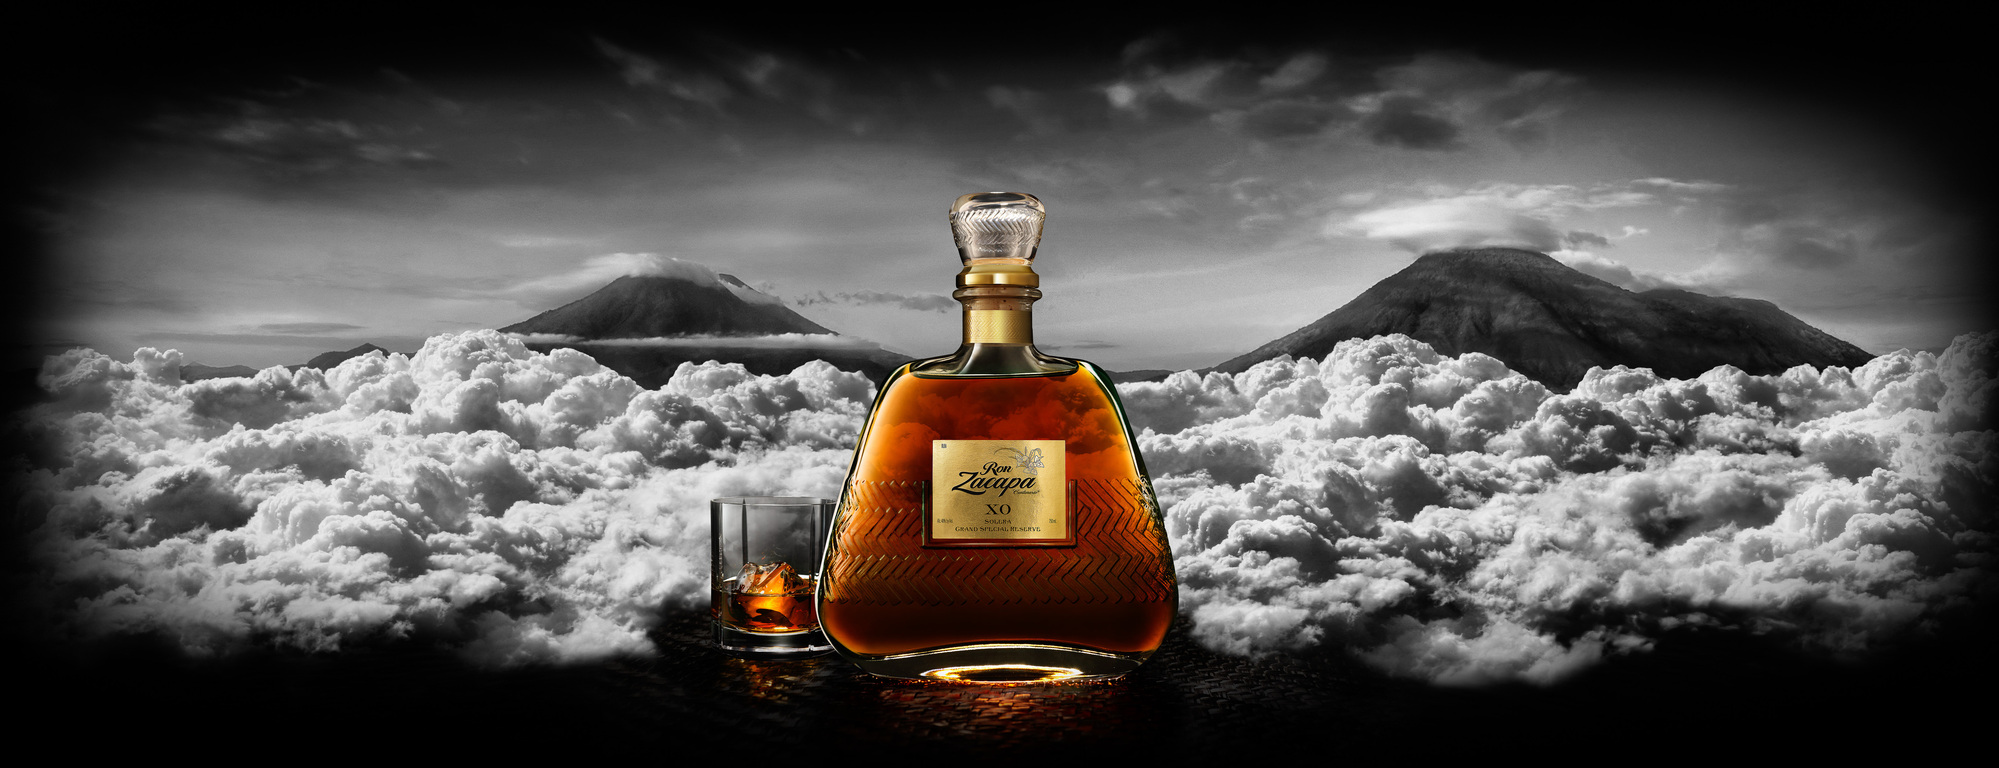 Ron Zacapa rum bottle by beverage and liquor photographer Timothy Hogan Studio in Los Angeles